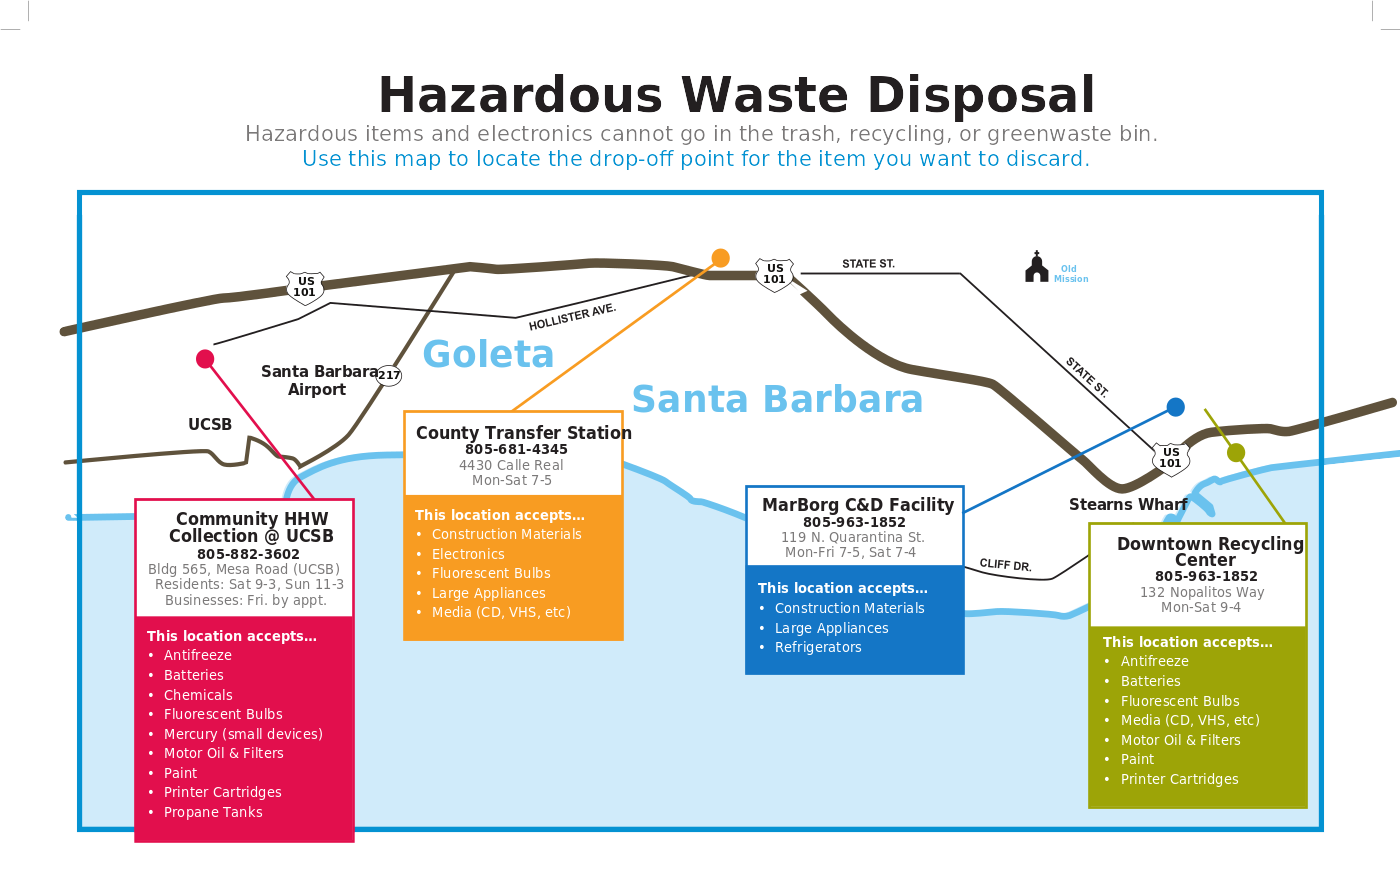 Map of Santa Barbara and Goleta showing what types of hazardous waste can be disposed of and where